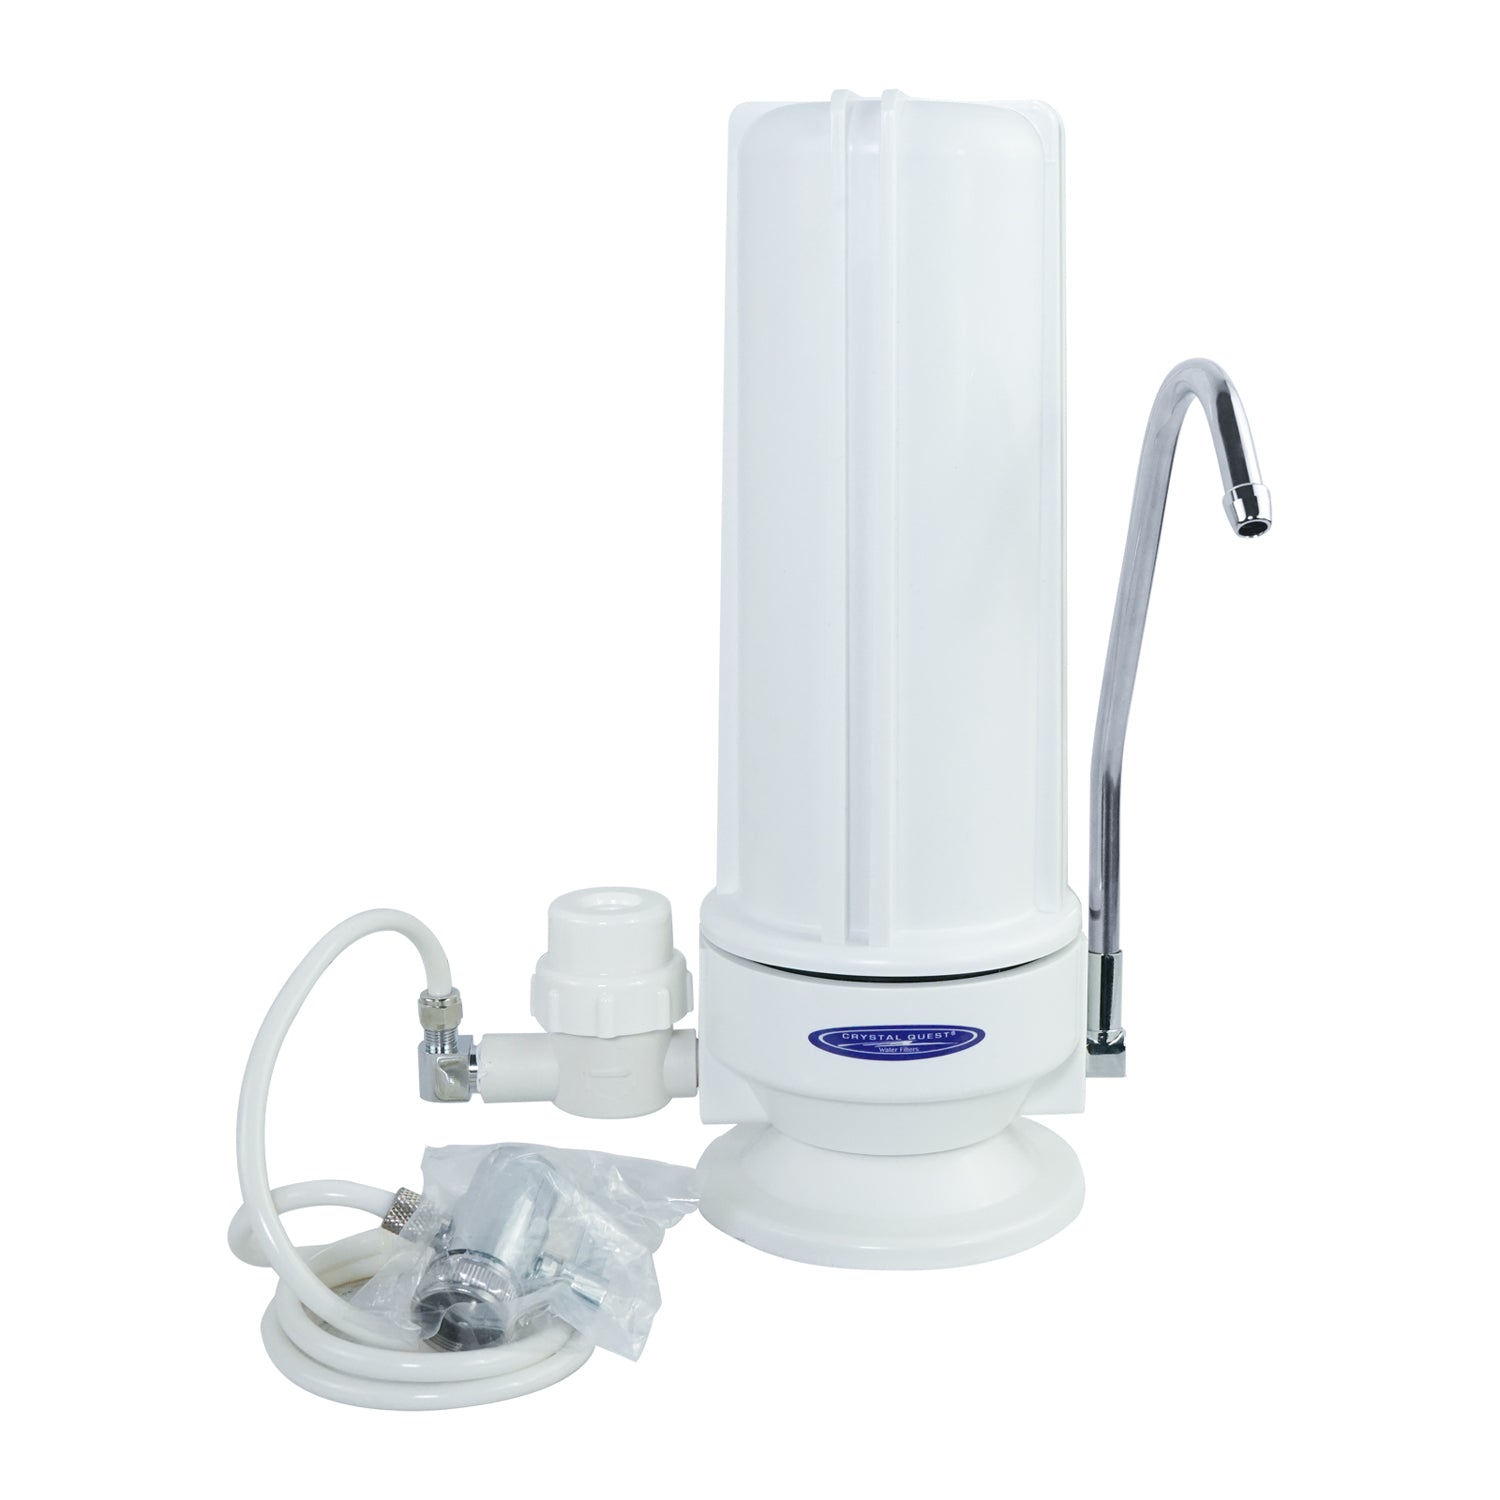 Nitrate Removal | SMART Single Cartridge Countertop Water Filter System - Countertop Water Filters - Crystal Quest